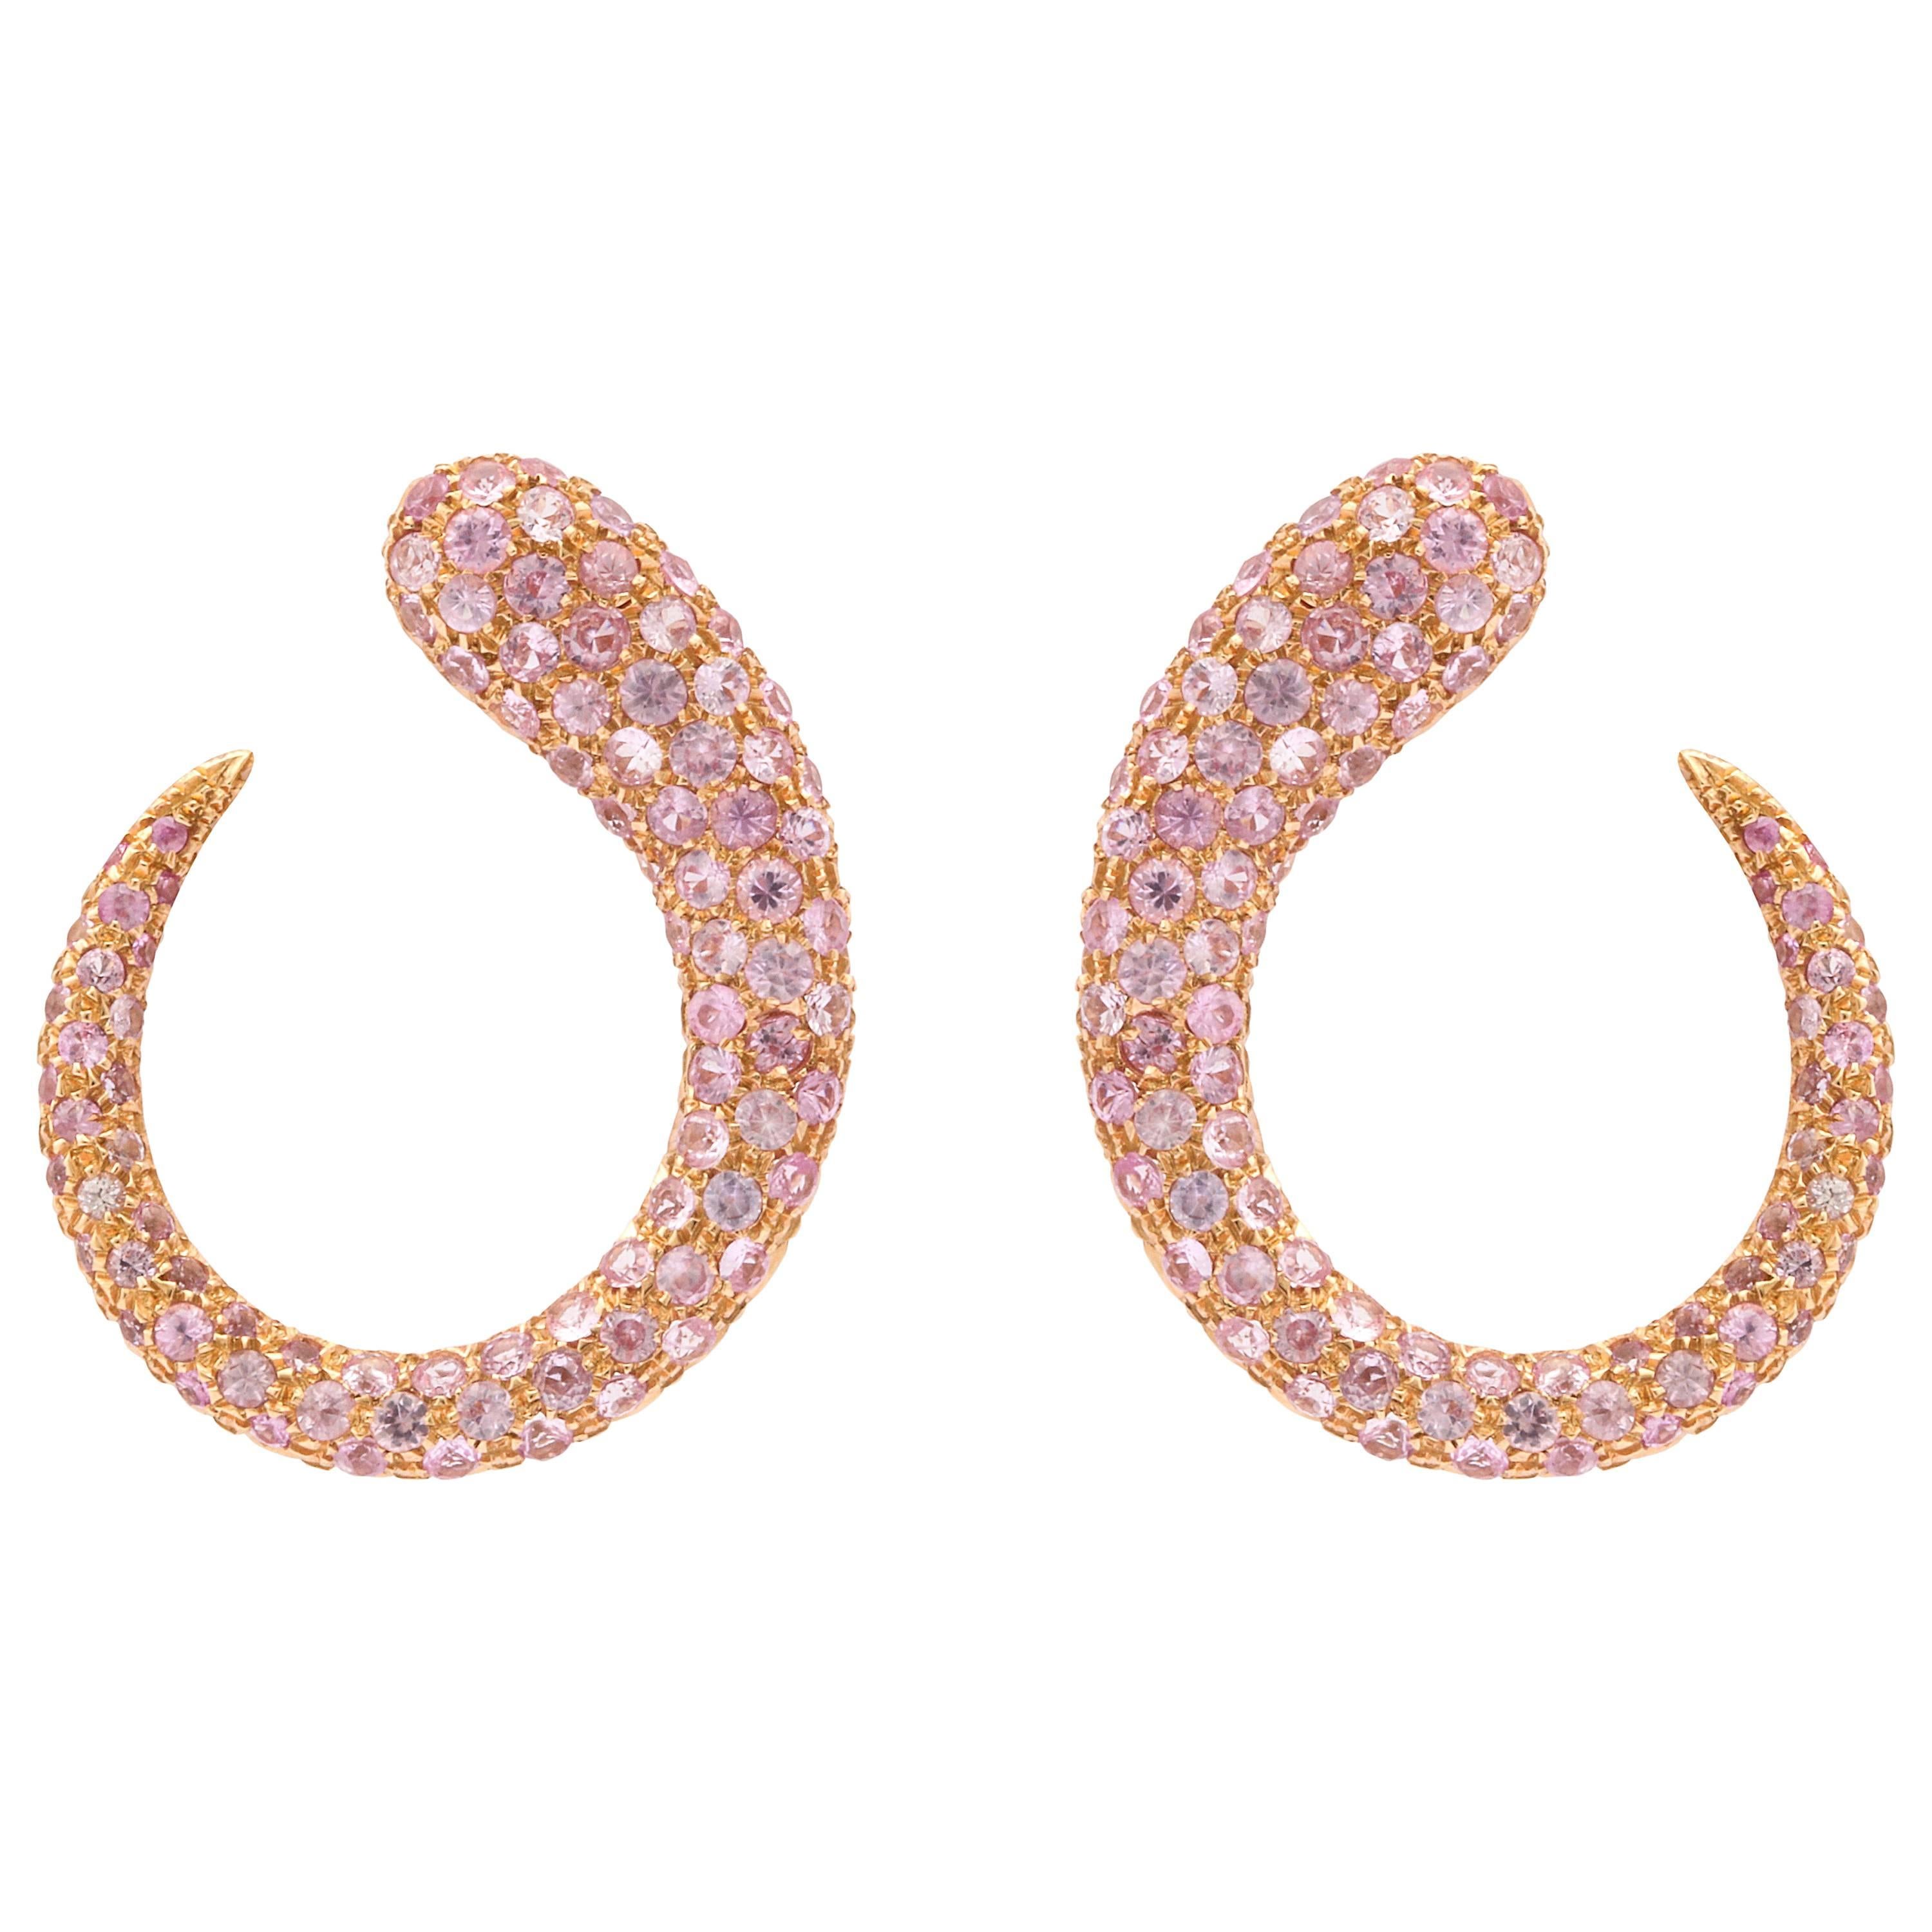 Faraone Mennella Gocce Earrings with Rose Sapphires For Sale